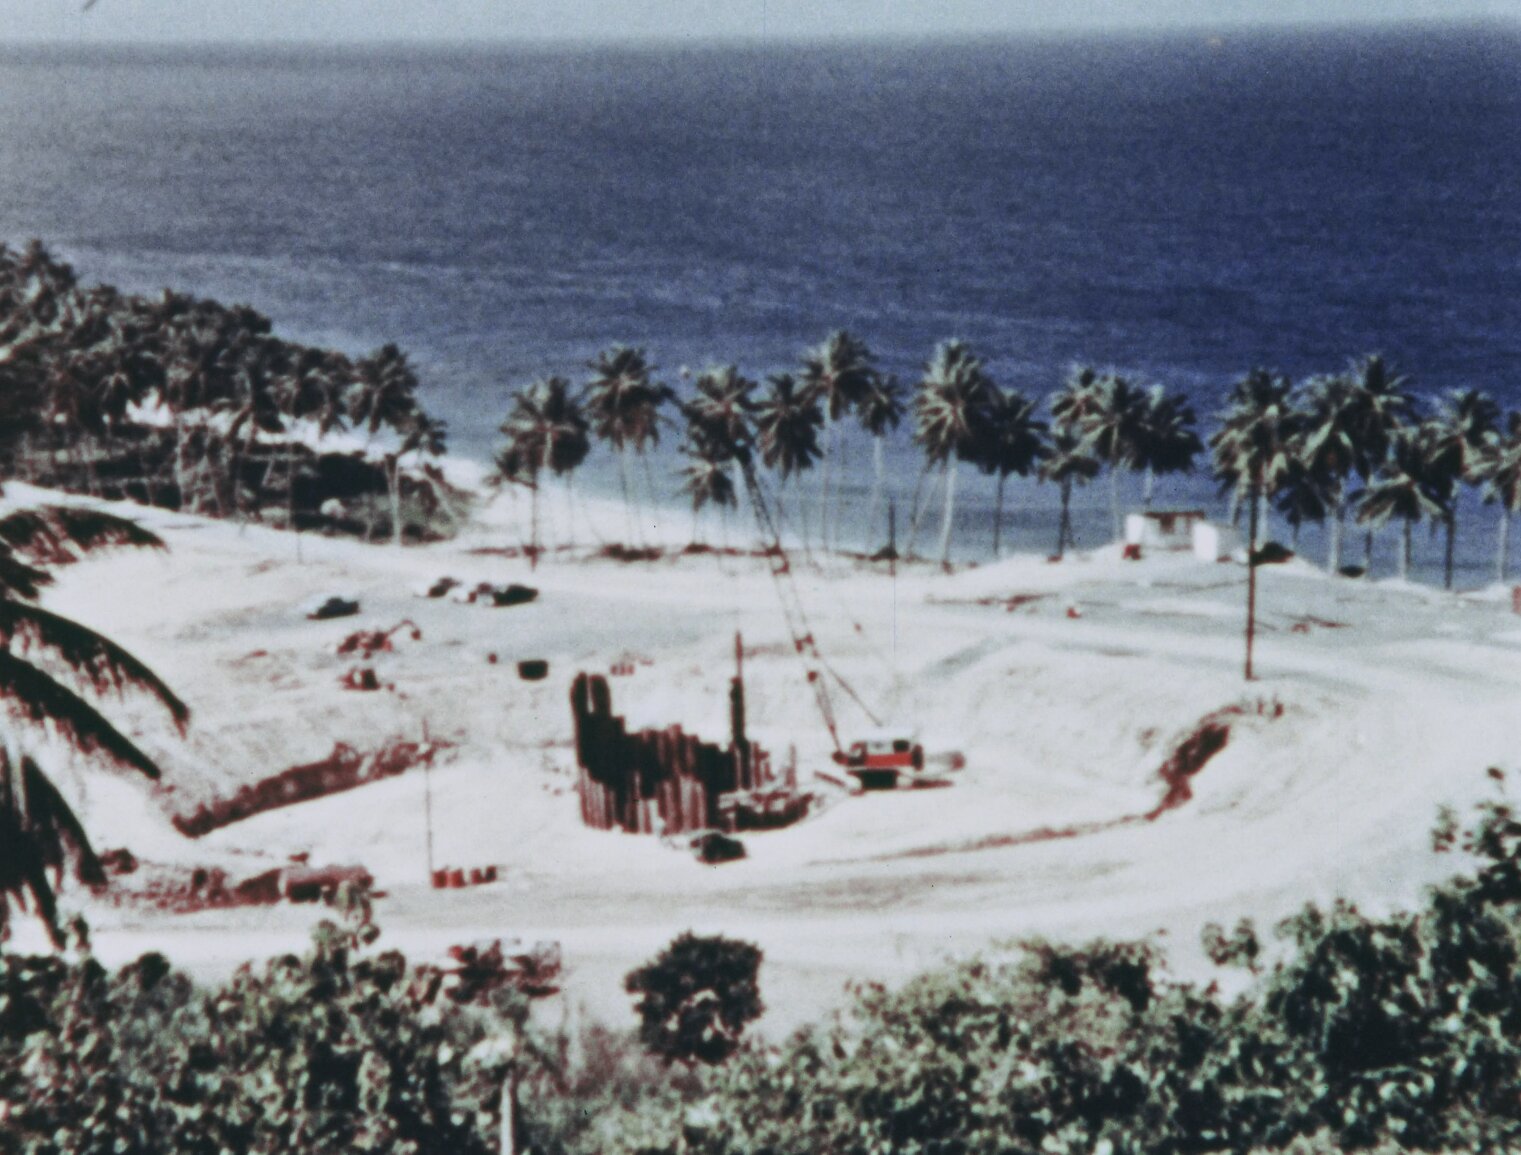 Elevated view of the initial BONUS reactor construction, showing a crane placing steel beams in a cylinder in an excavated area. Palm trees and ocean are seen in the background.